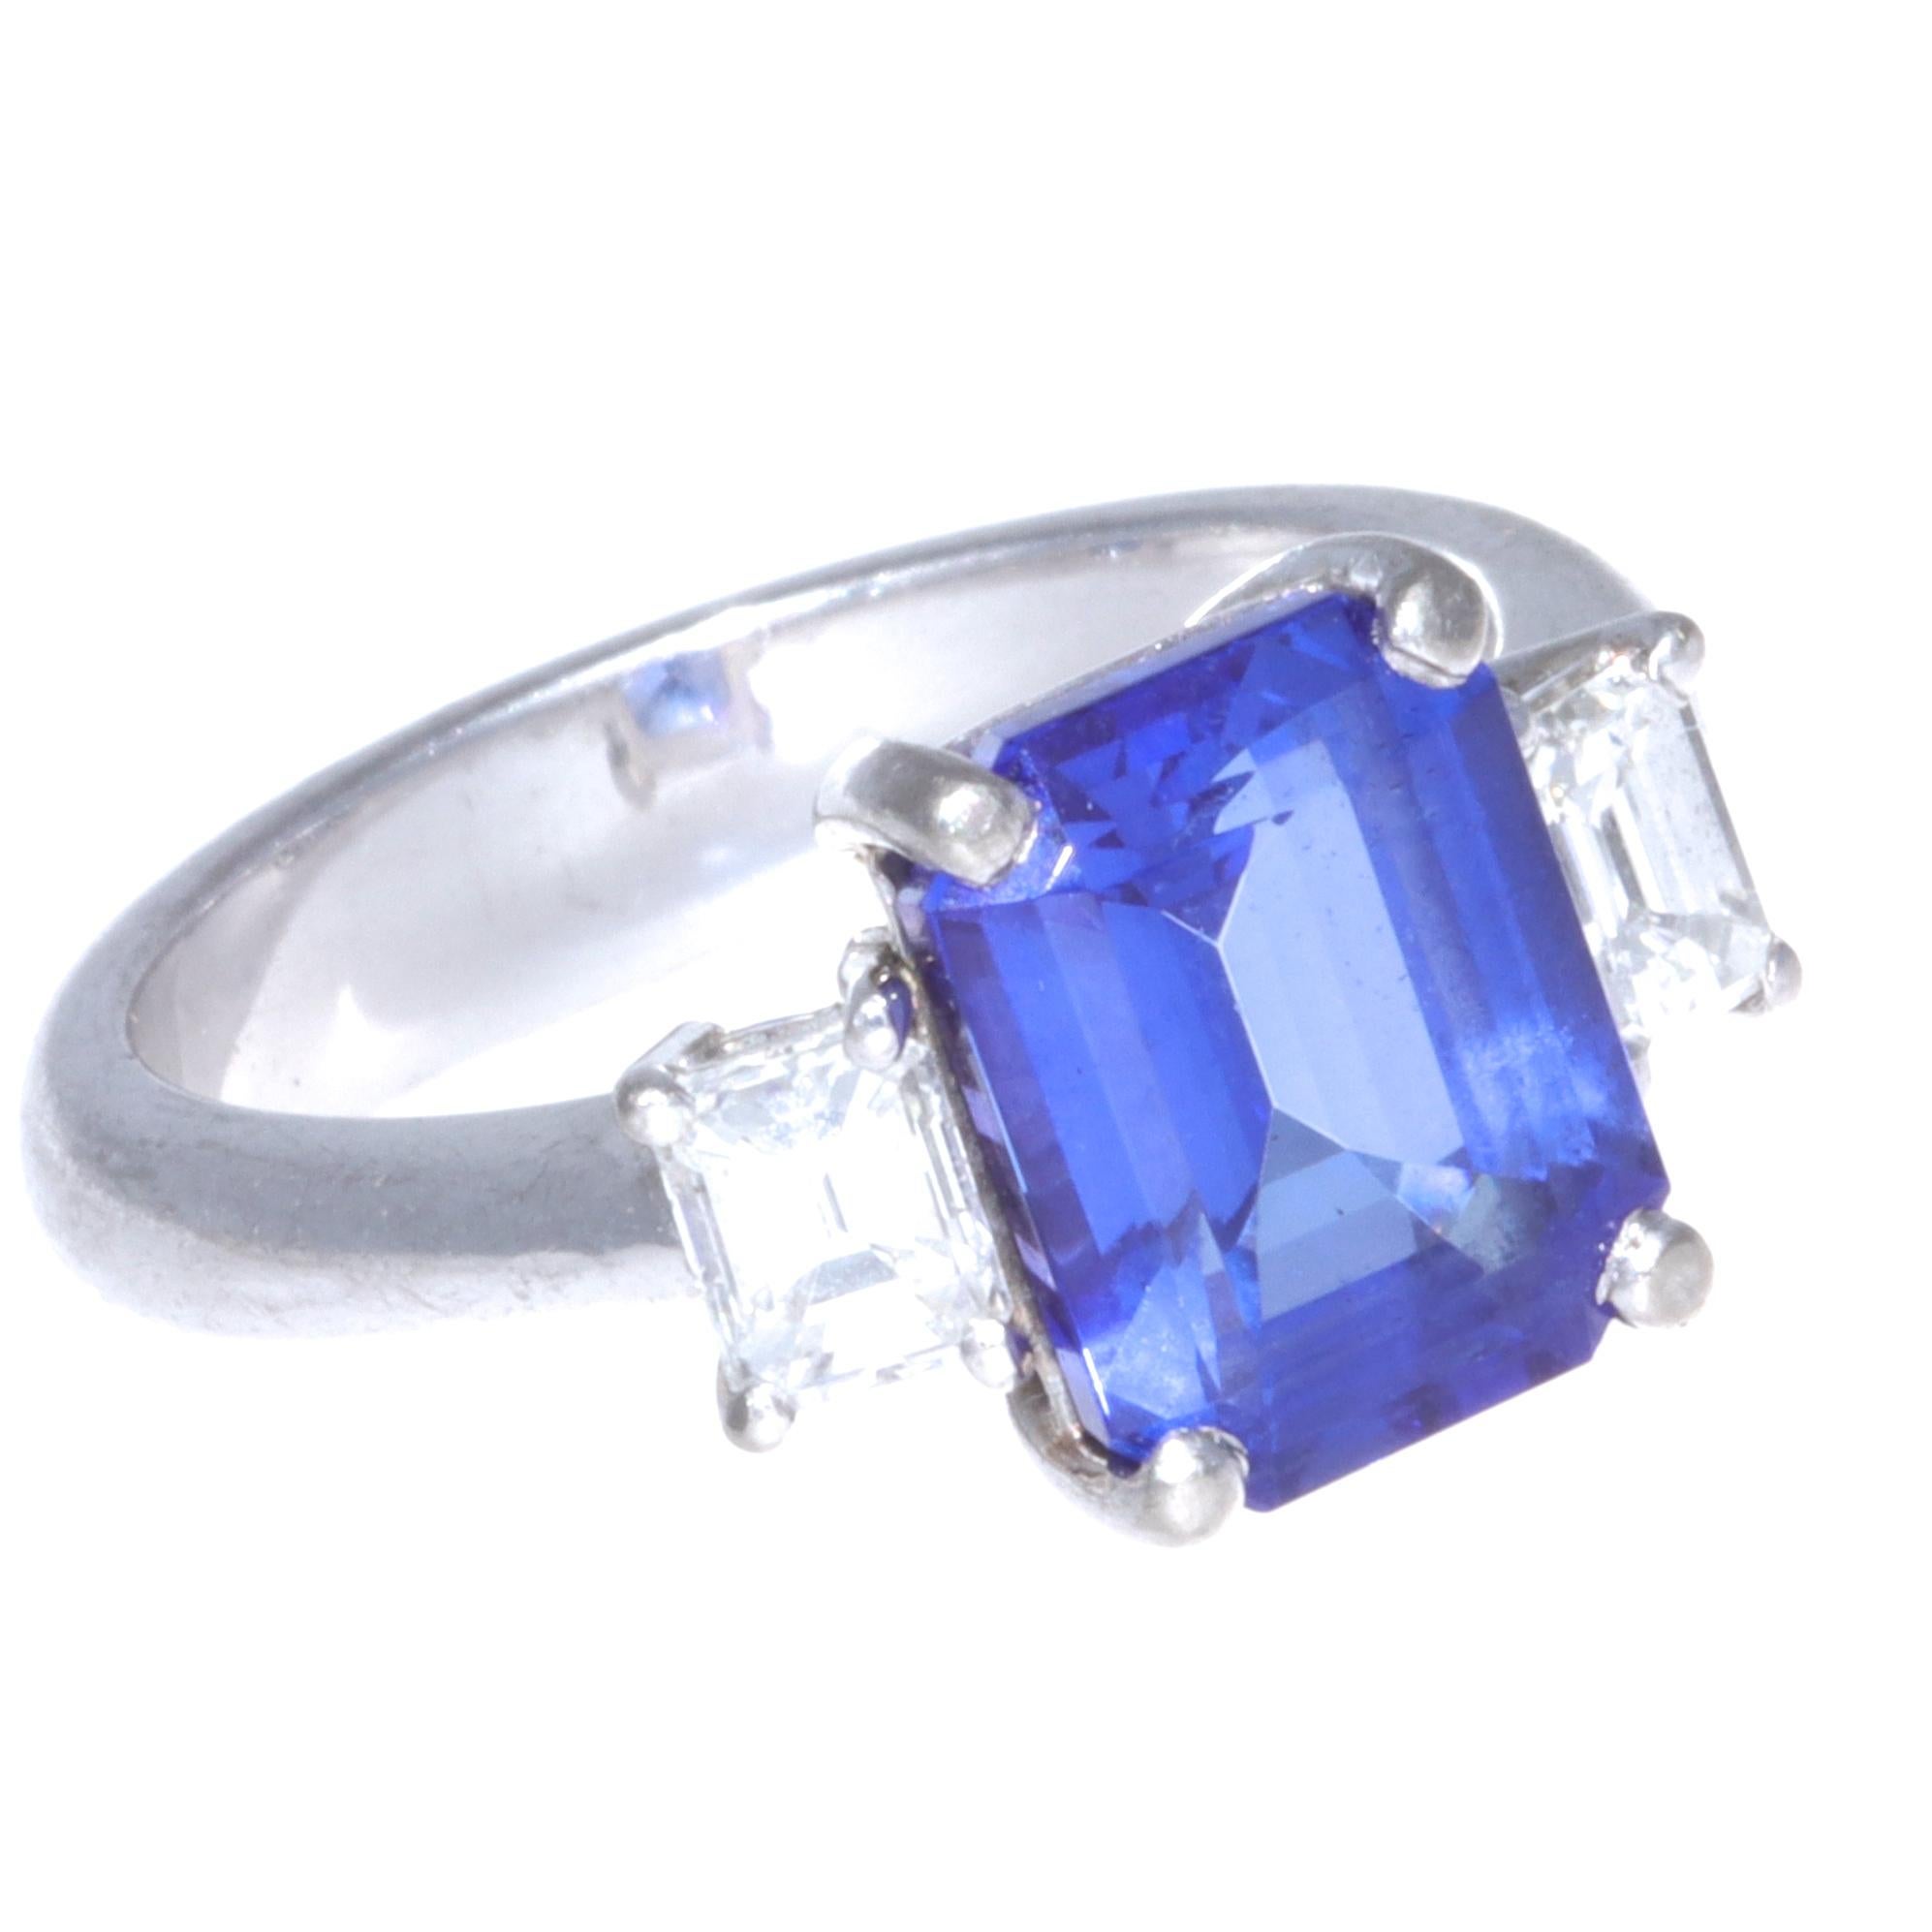 The vibrant, blue color of the Tanzanite immediately strikes your heart. You won't take your eyes off this gorgeous ring. This Vintage Tanzanite Diamond 18k White Gold Ring will be the perfect accessory to celebrate a special occasion or to add to